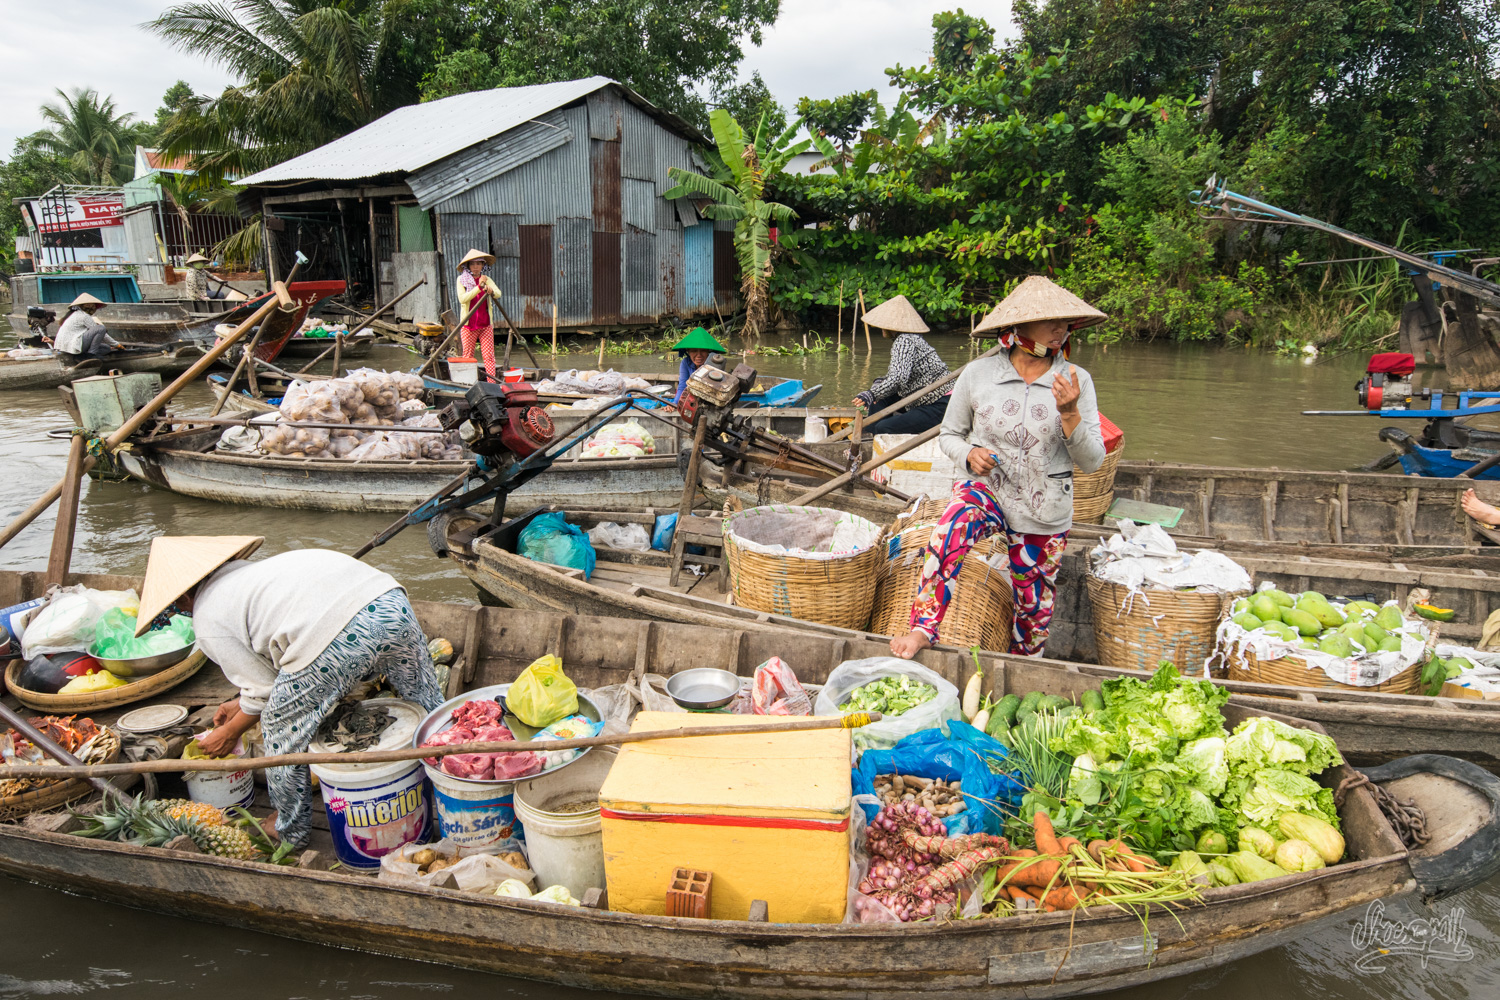 Another floating market in Can Tho